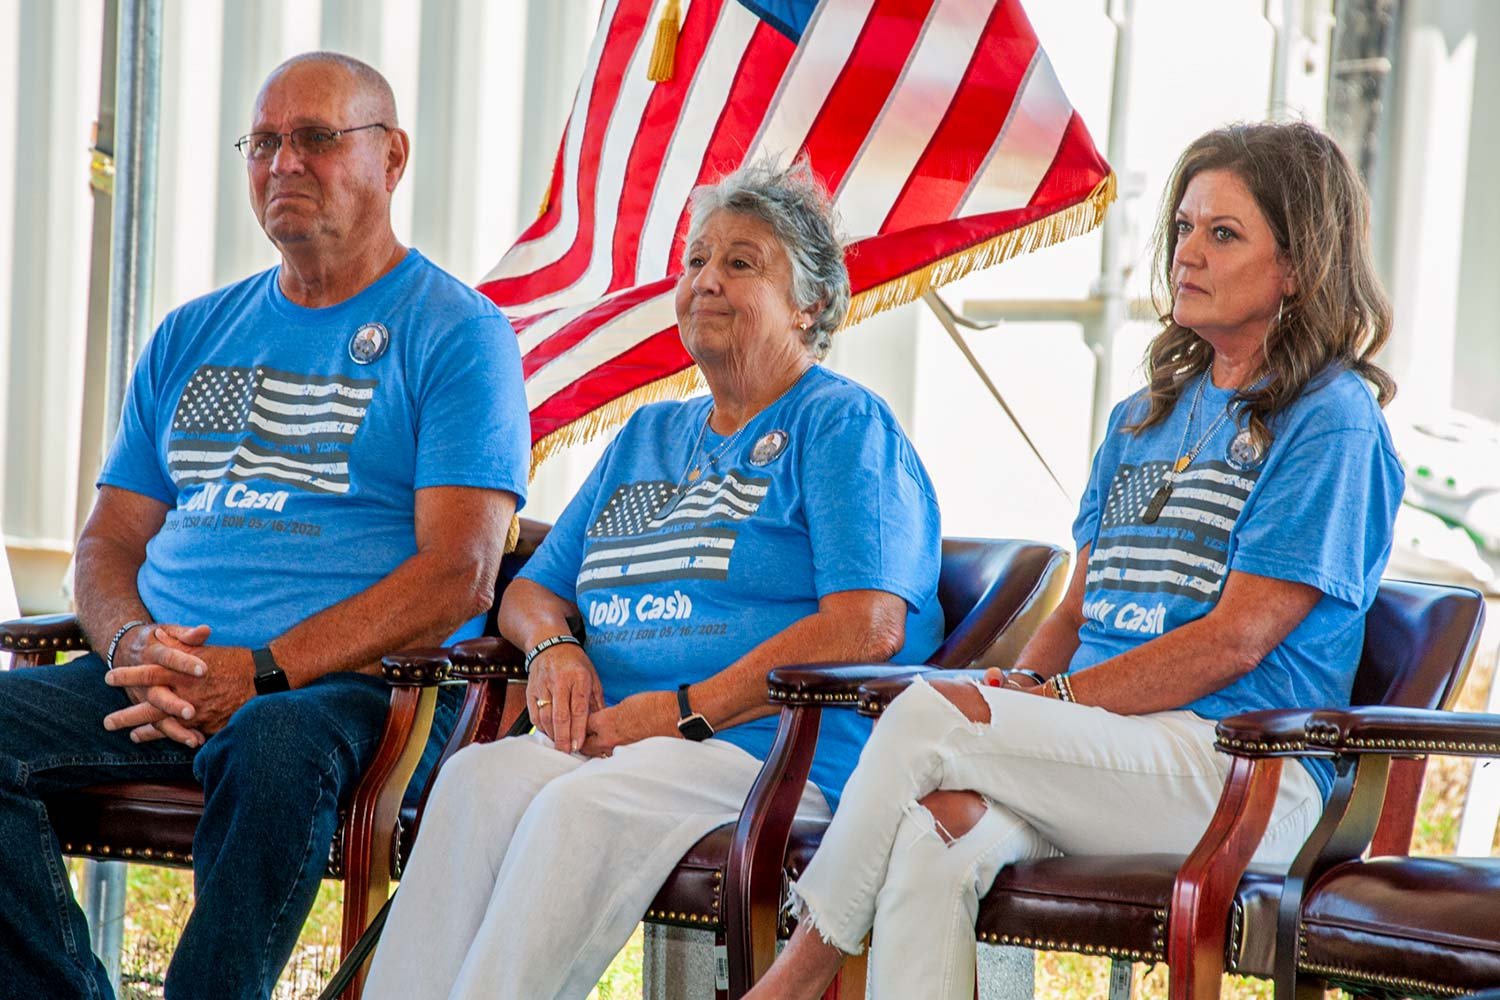  Jody Cash’s parents Harold and Teresa, and his widow Michelle, listened to the remarks of Gov. Andy Beshear during Monday morning’s ceremony. (Photo by Michael Moore) 